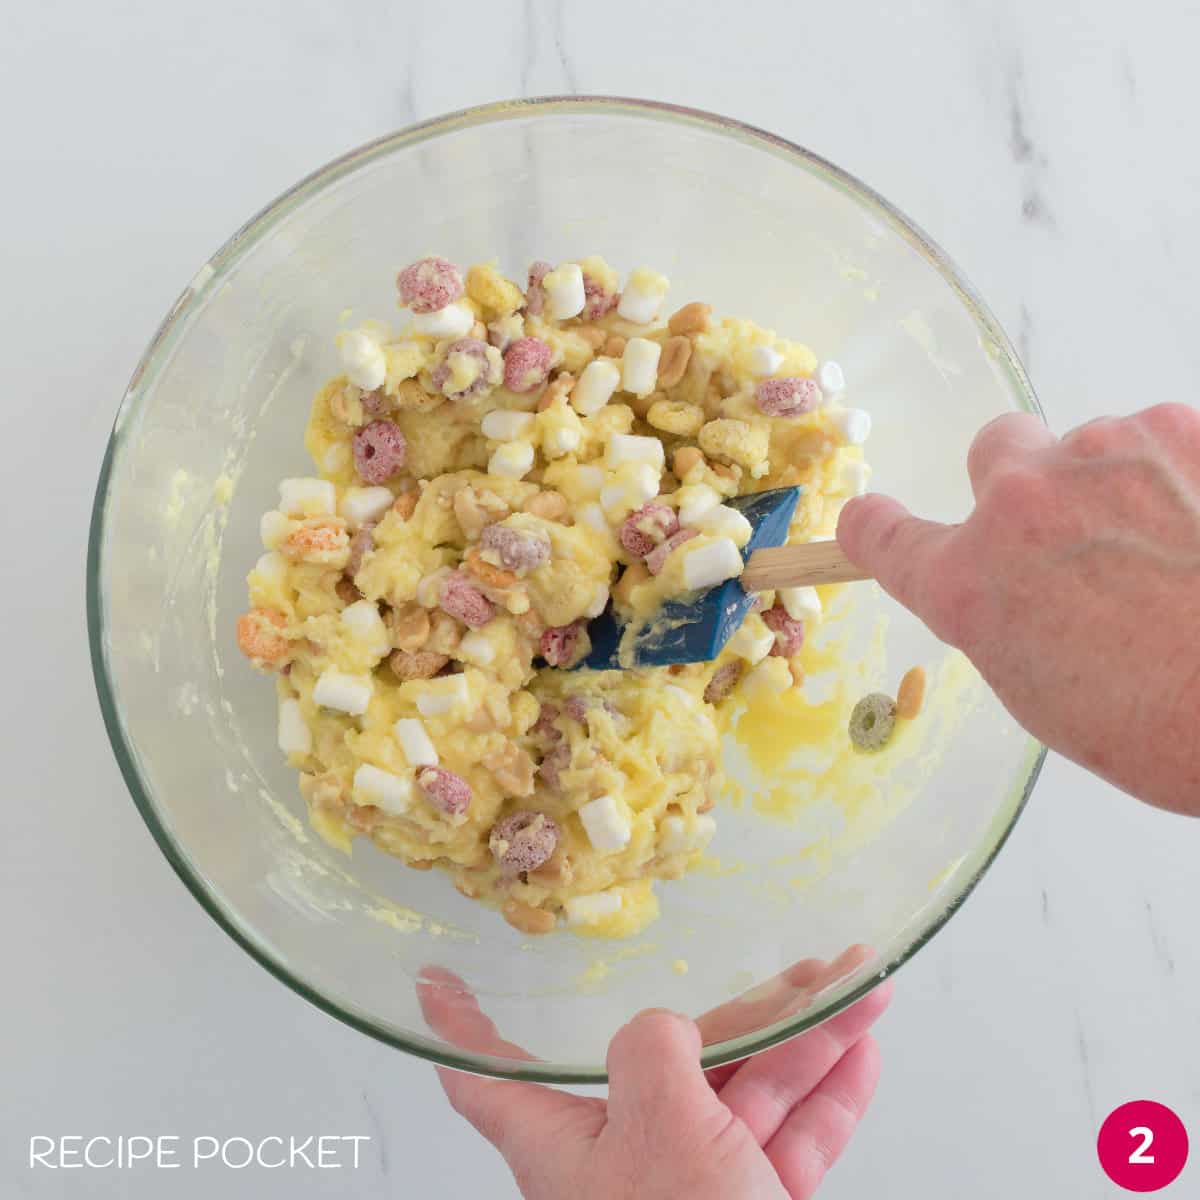 Melted white chocolate, nuts and fruit flavored cereal  being mixed in a bowl.